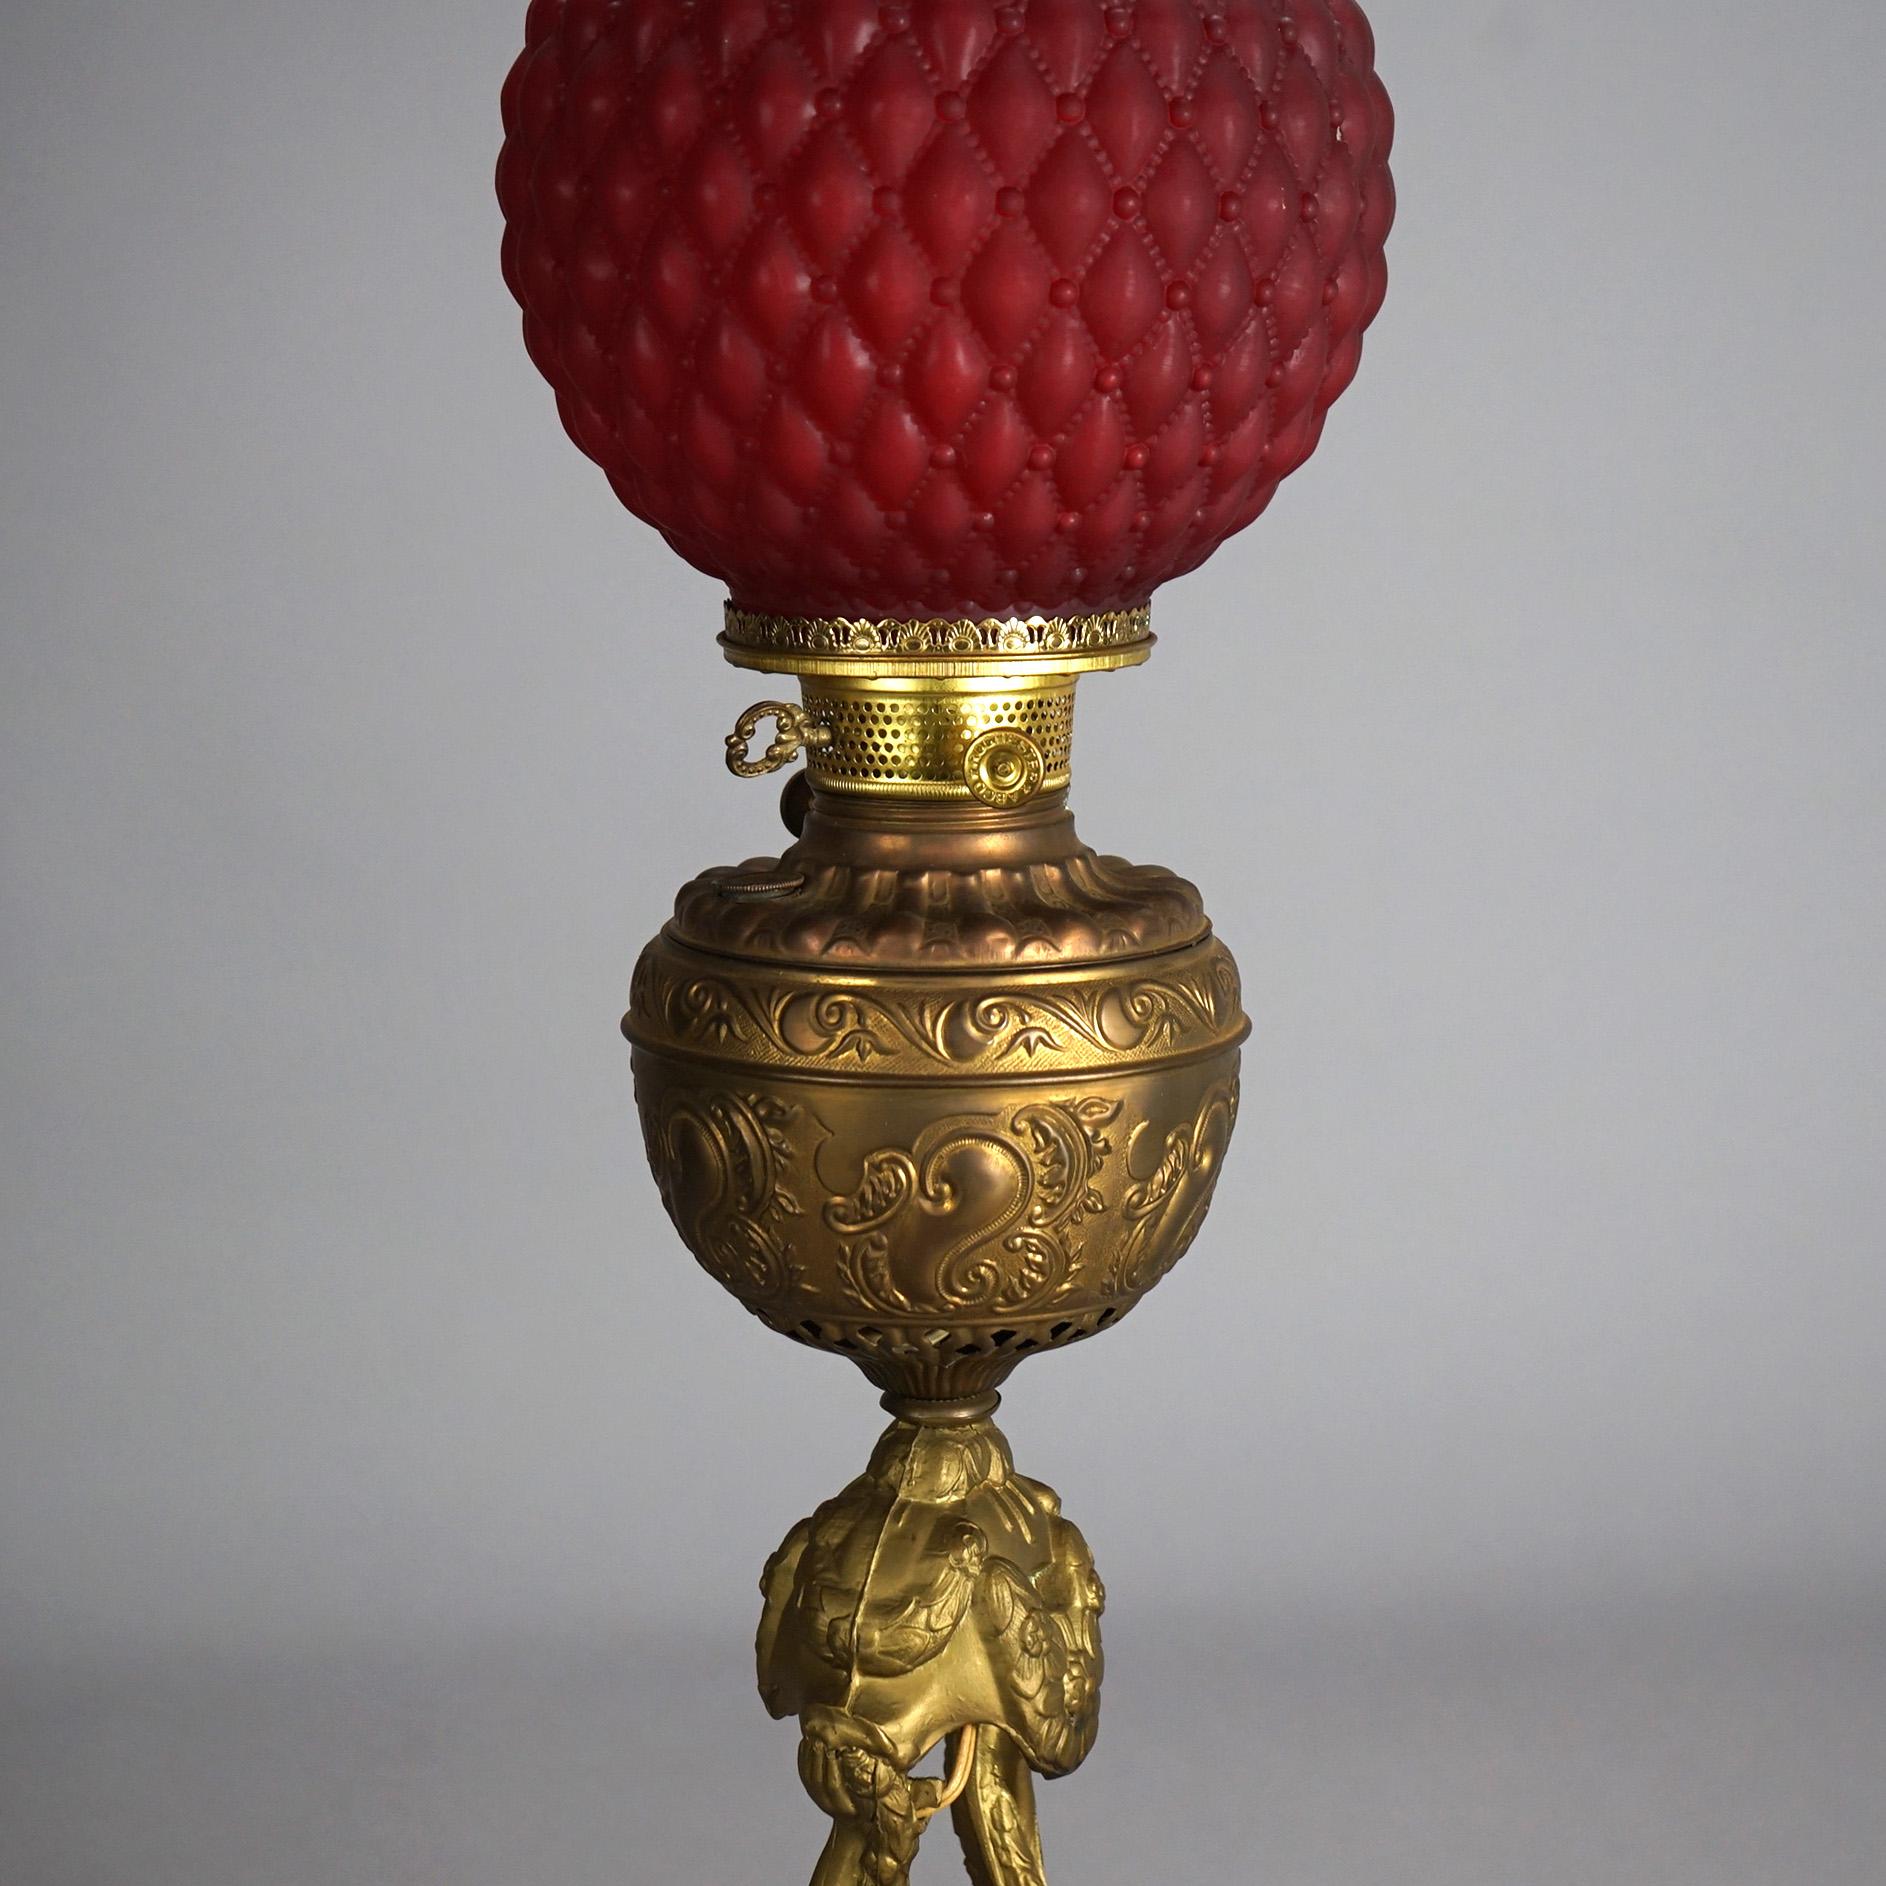 American Antique Figural Gilt Metal Parlor Lamp with Quilted Red Glass Shade Circa 1900 For Sale